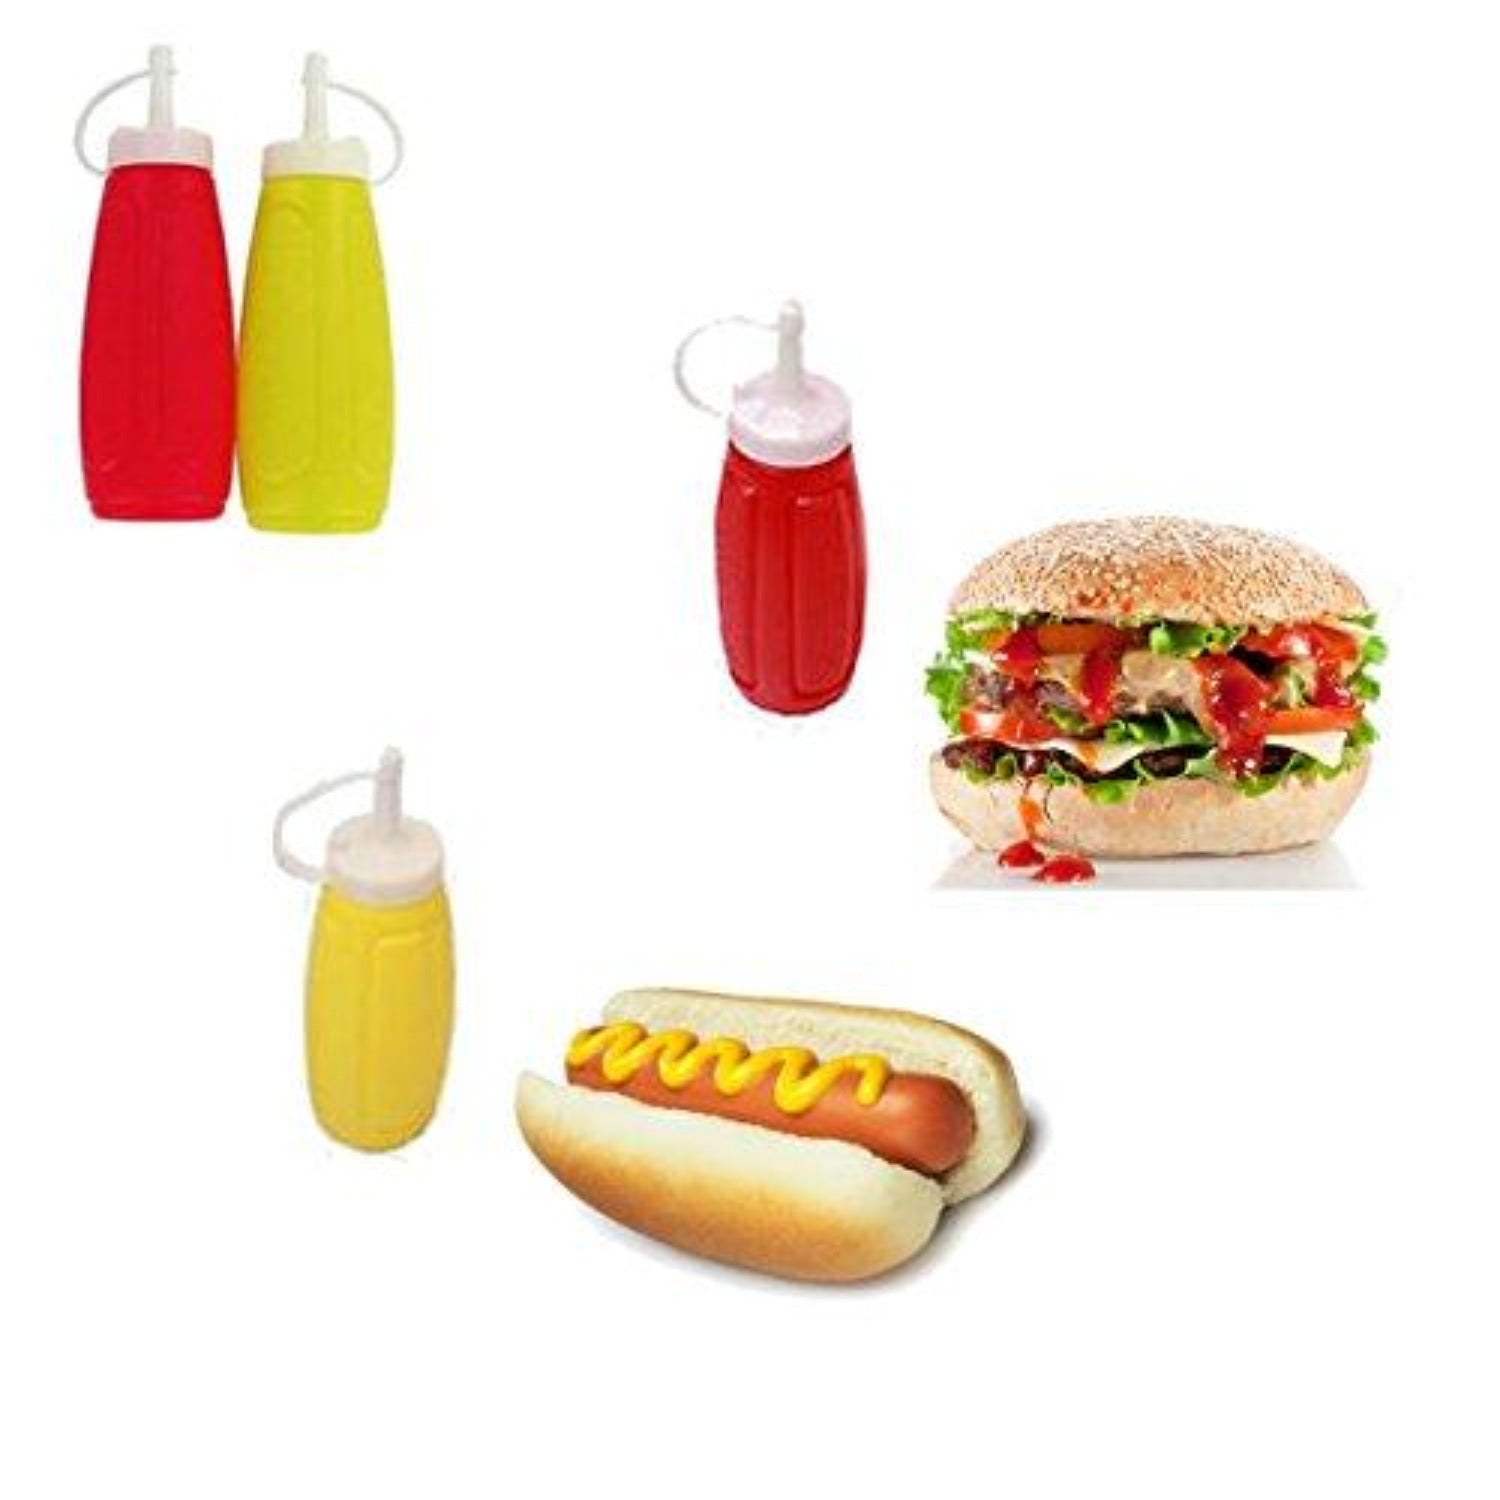 The Best Hot Dog Cart Accessories - Ketchup Squeeze Bottles